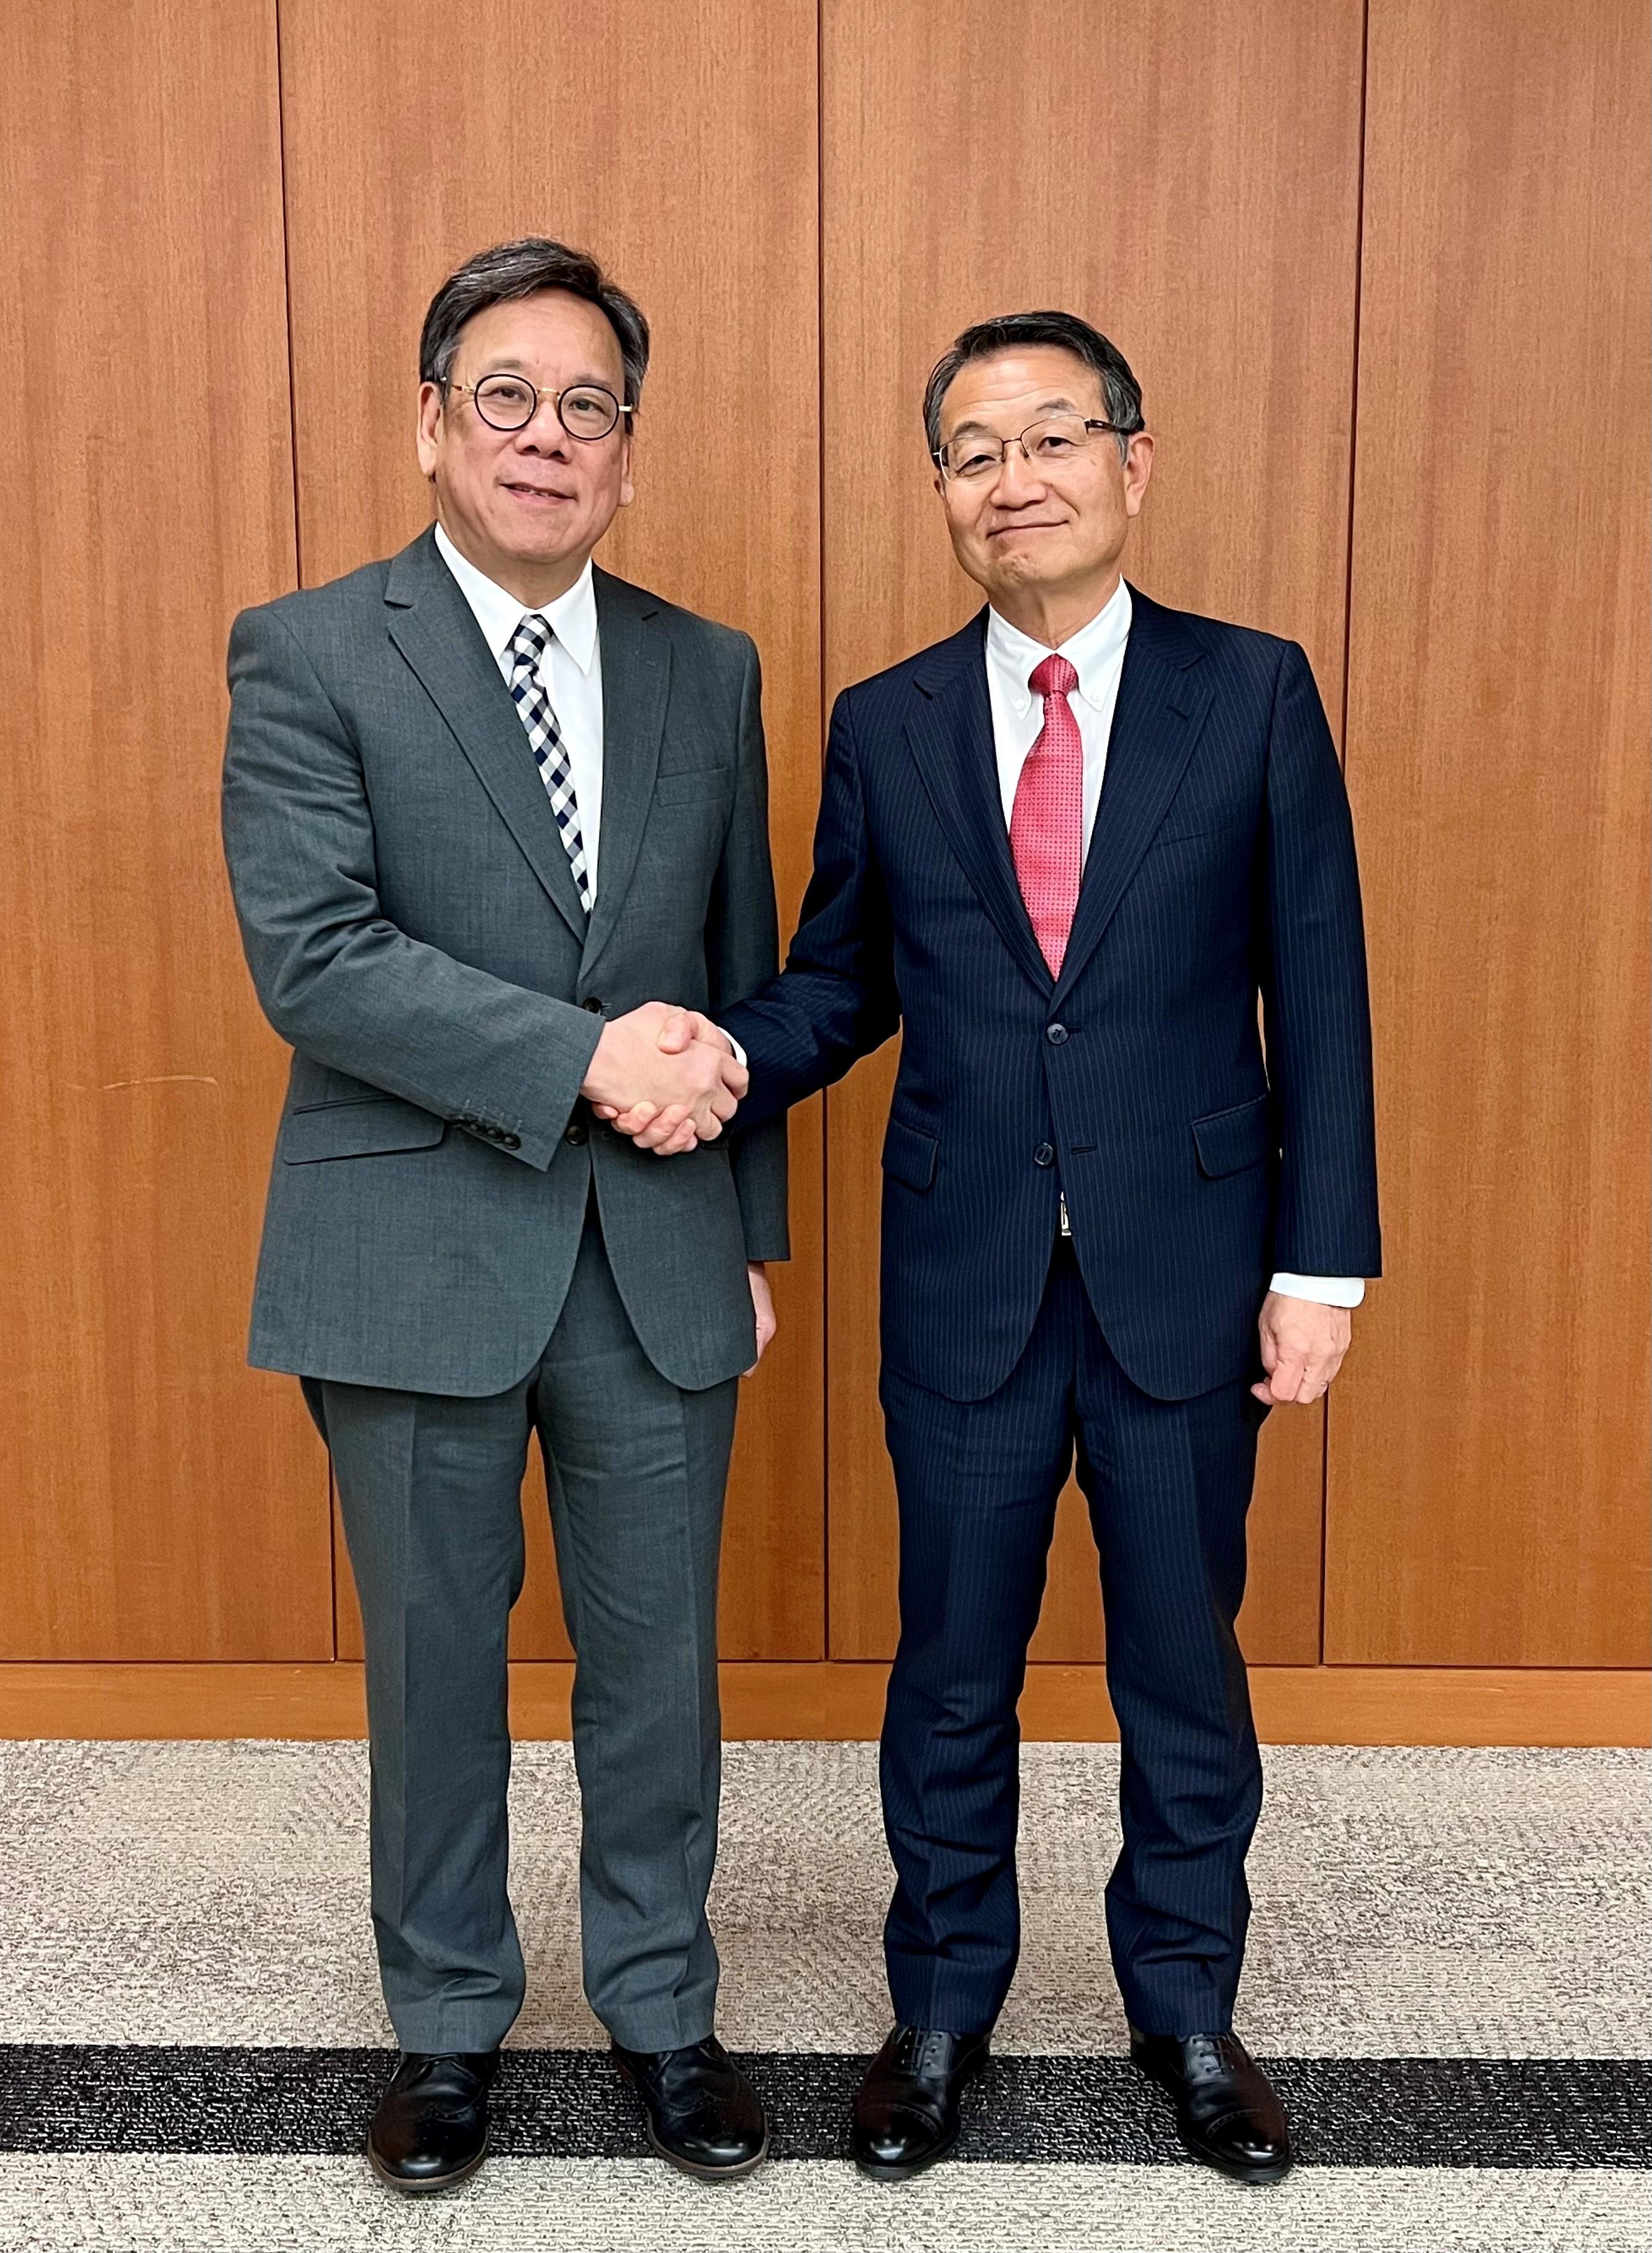 The Secretary for Commerce and Economic Development, Mr Algernon Yau, briefed Japanese enterprises on Hong Kong's business environment and advantages at a business roundtable with members of the Japan-Hong Kong Business Cooperation Committee organised by the Keidanren (Japan Business Federation) in Tokyo, Japan, today (June 19). Mr Yau (left) and the Chairman of the Japan-Hong Kong Business Cooperation Committee, Mr Junichiro Ikeda (right), are pictured before the meeting.